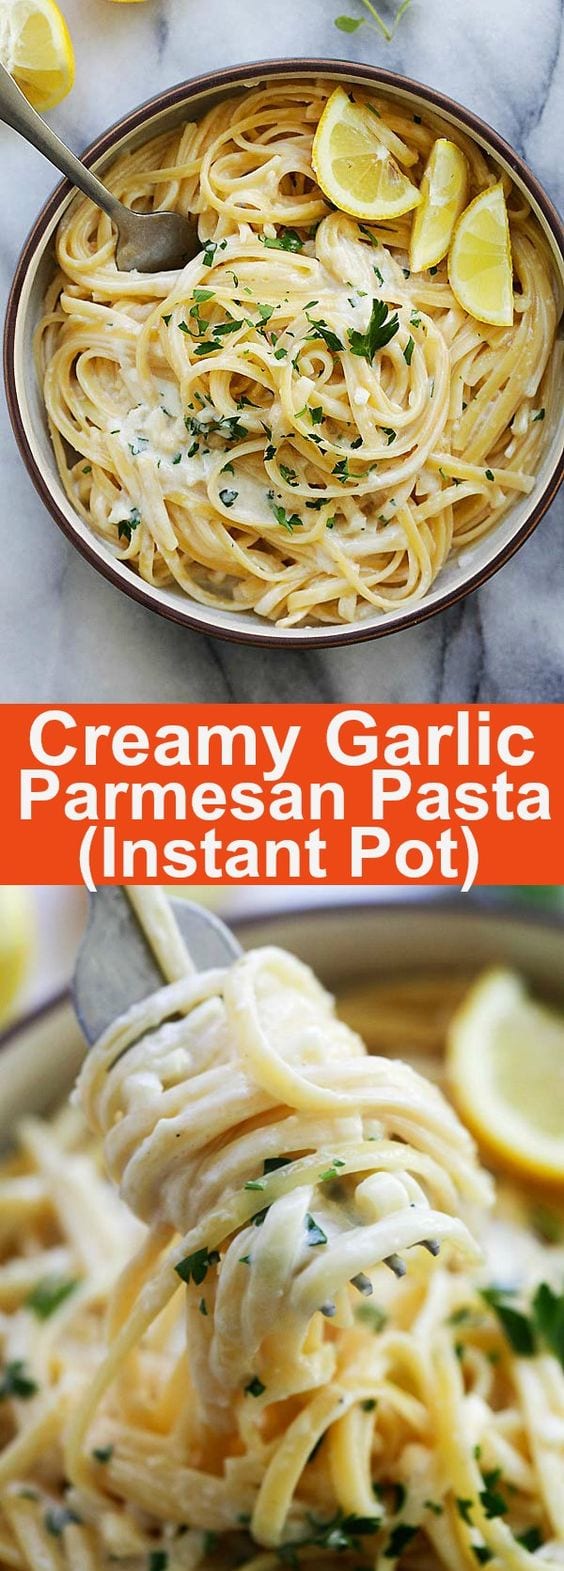 Instant Pot Creamy Garlic Parmesan Pasta - Instant Pot pasta in a jiffy! This recipe takes only 8 minutes pressure cooking and the end result is creamy, cheesy and garlicky pasta | rasamalaysia.com